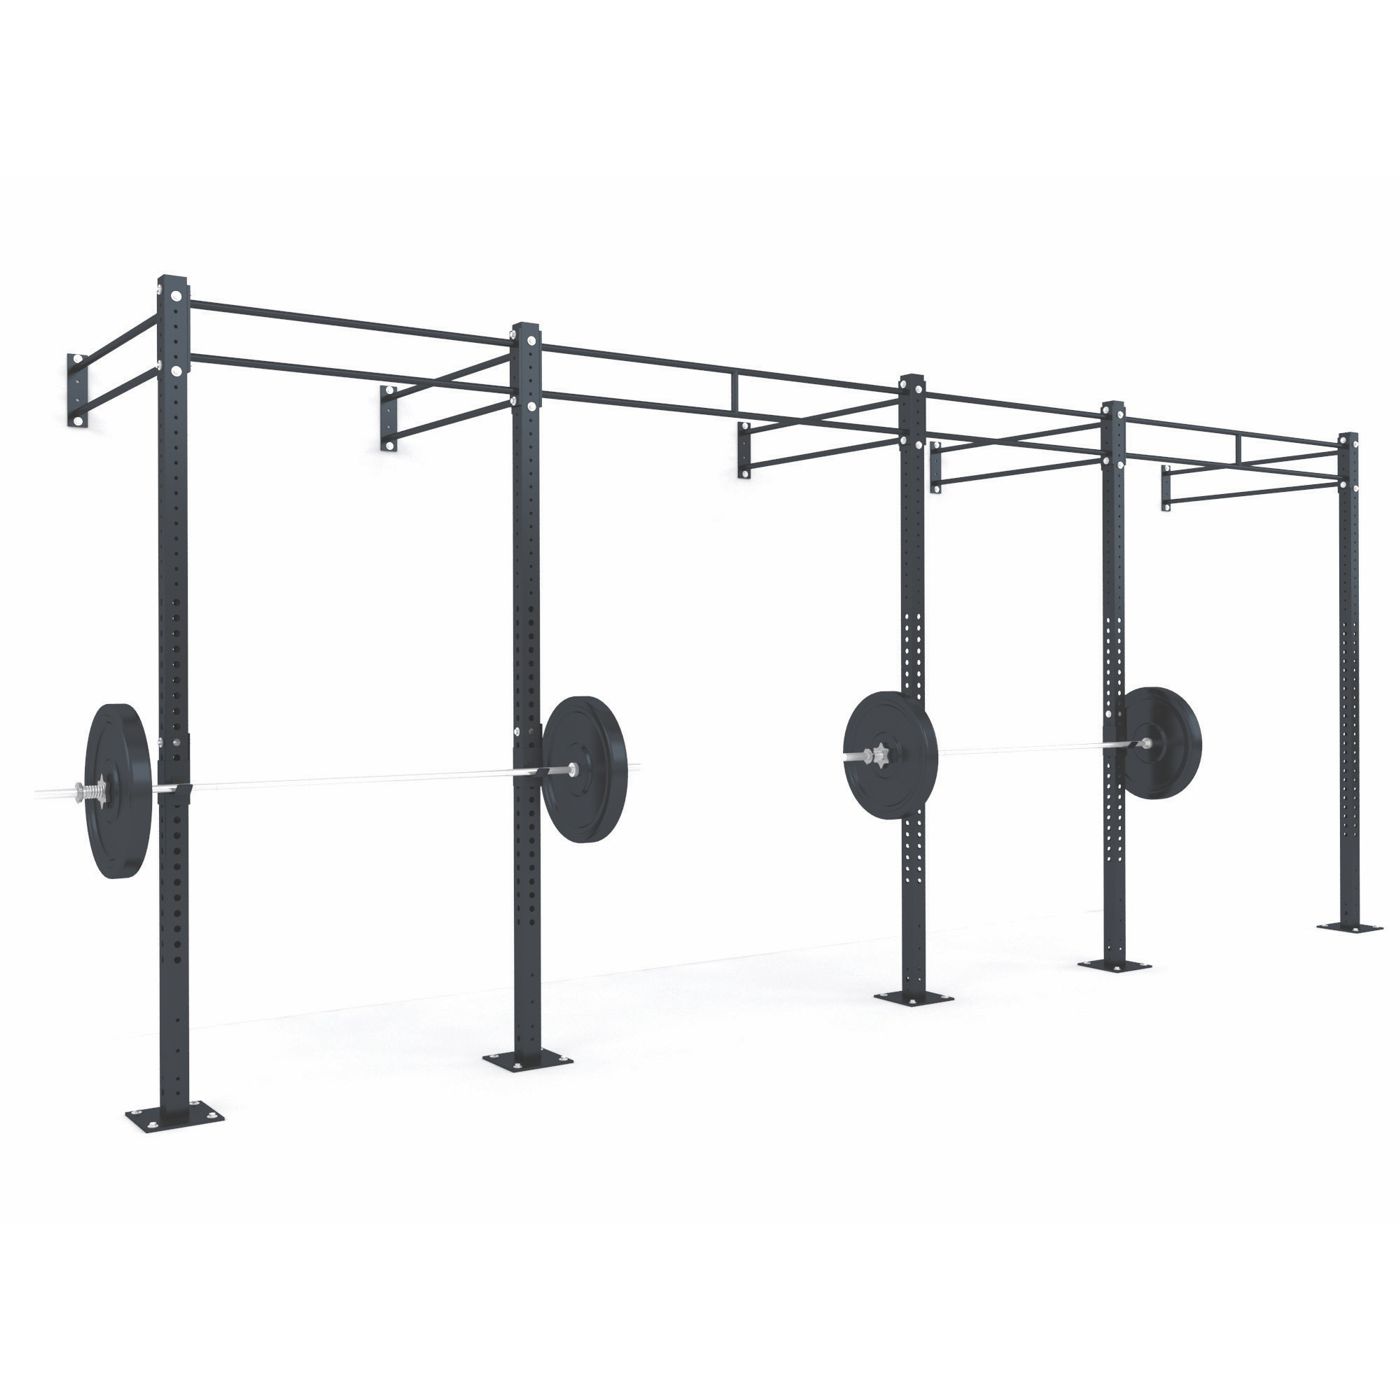 Cage Functional structure B9 - 577x172x275cm Amaya Sport